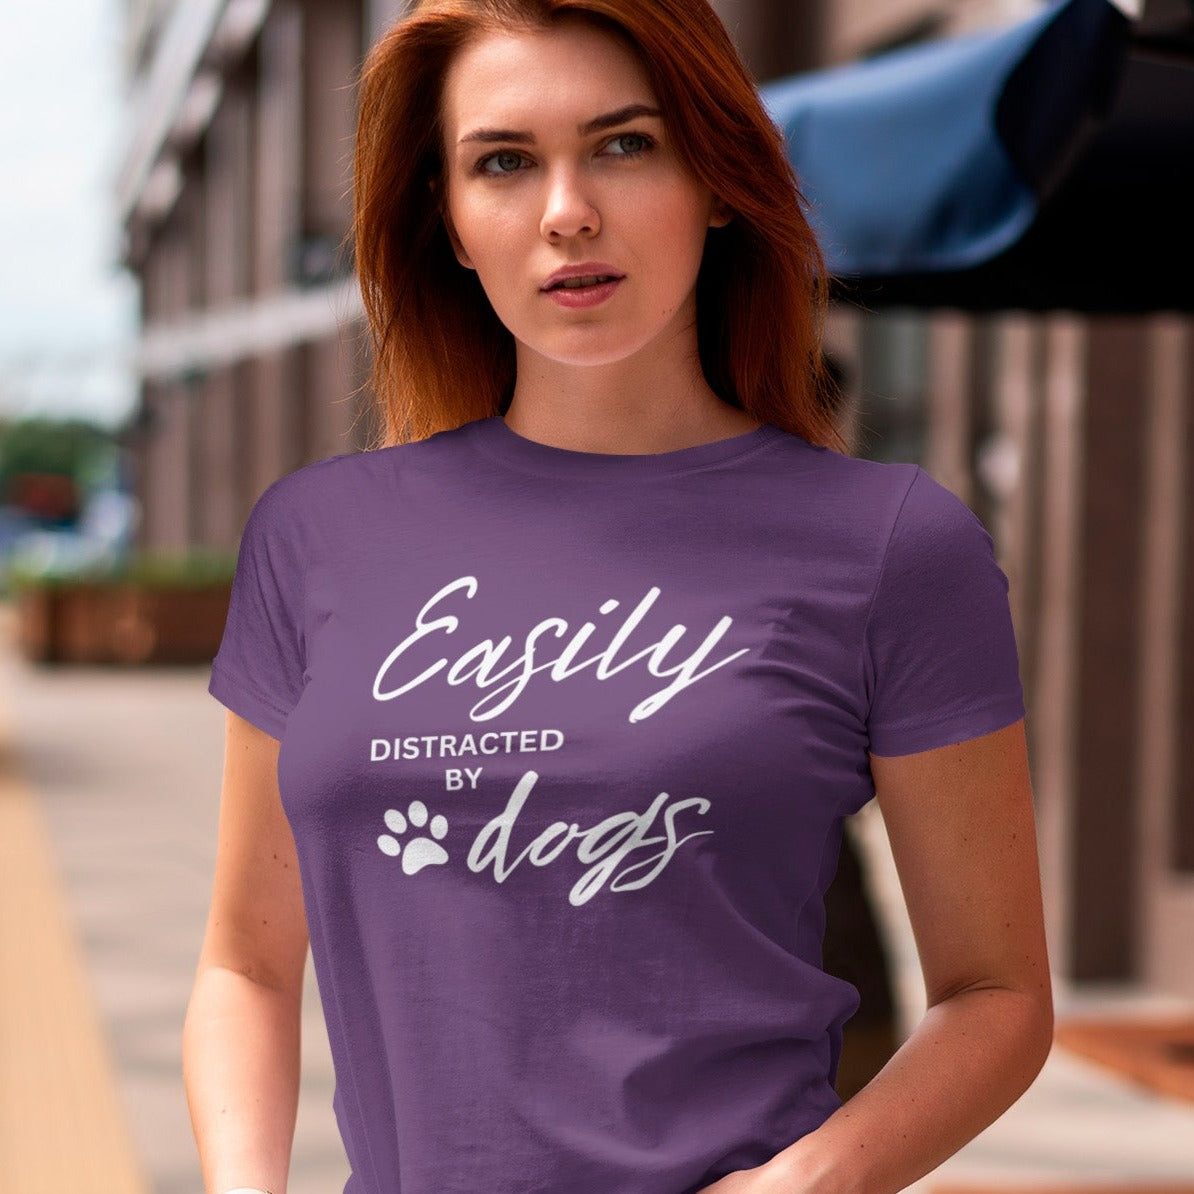 easily-distracted-by-dogs-team-purple-t-shirt-womens-animal-lover-mockup-featuring-a-serious-long-haired-woman